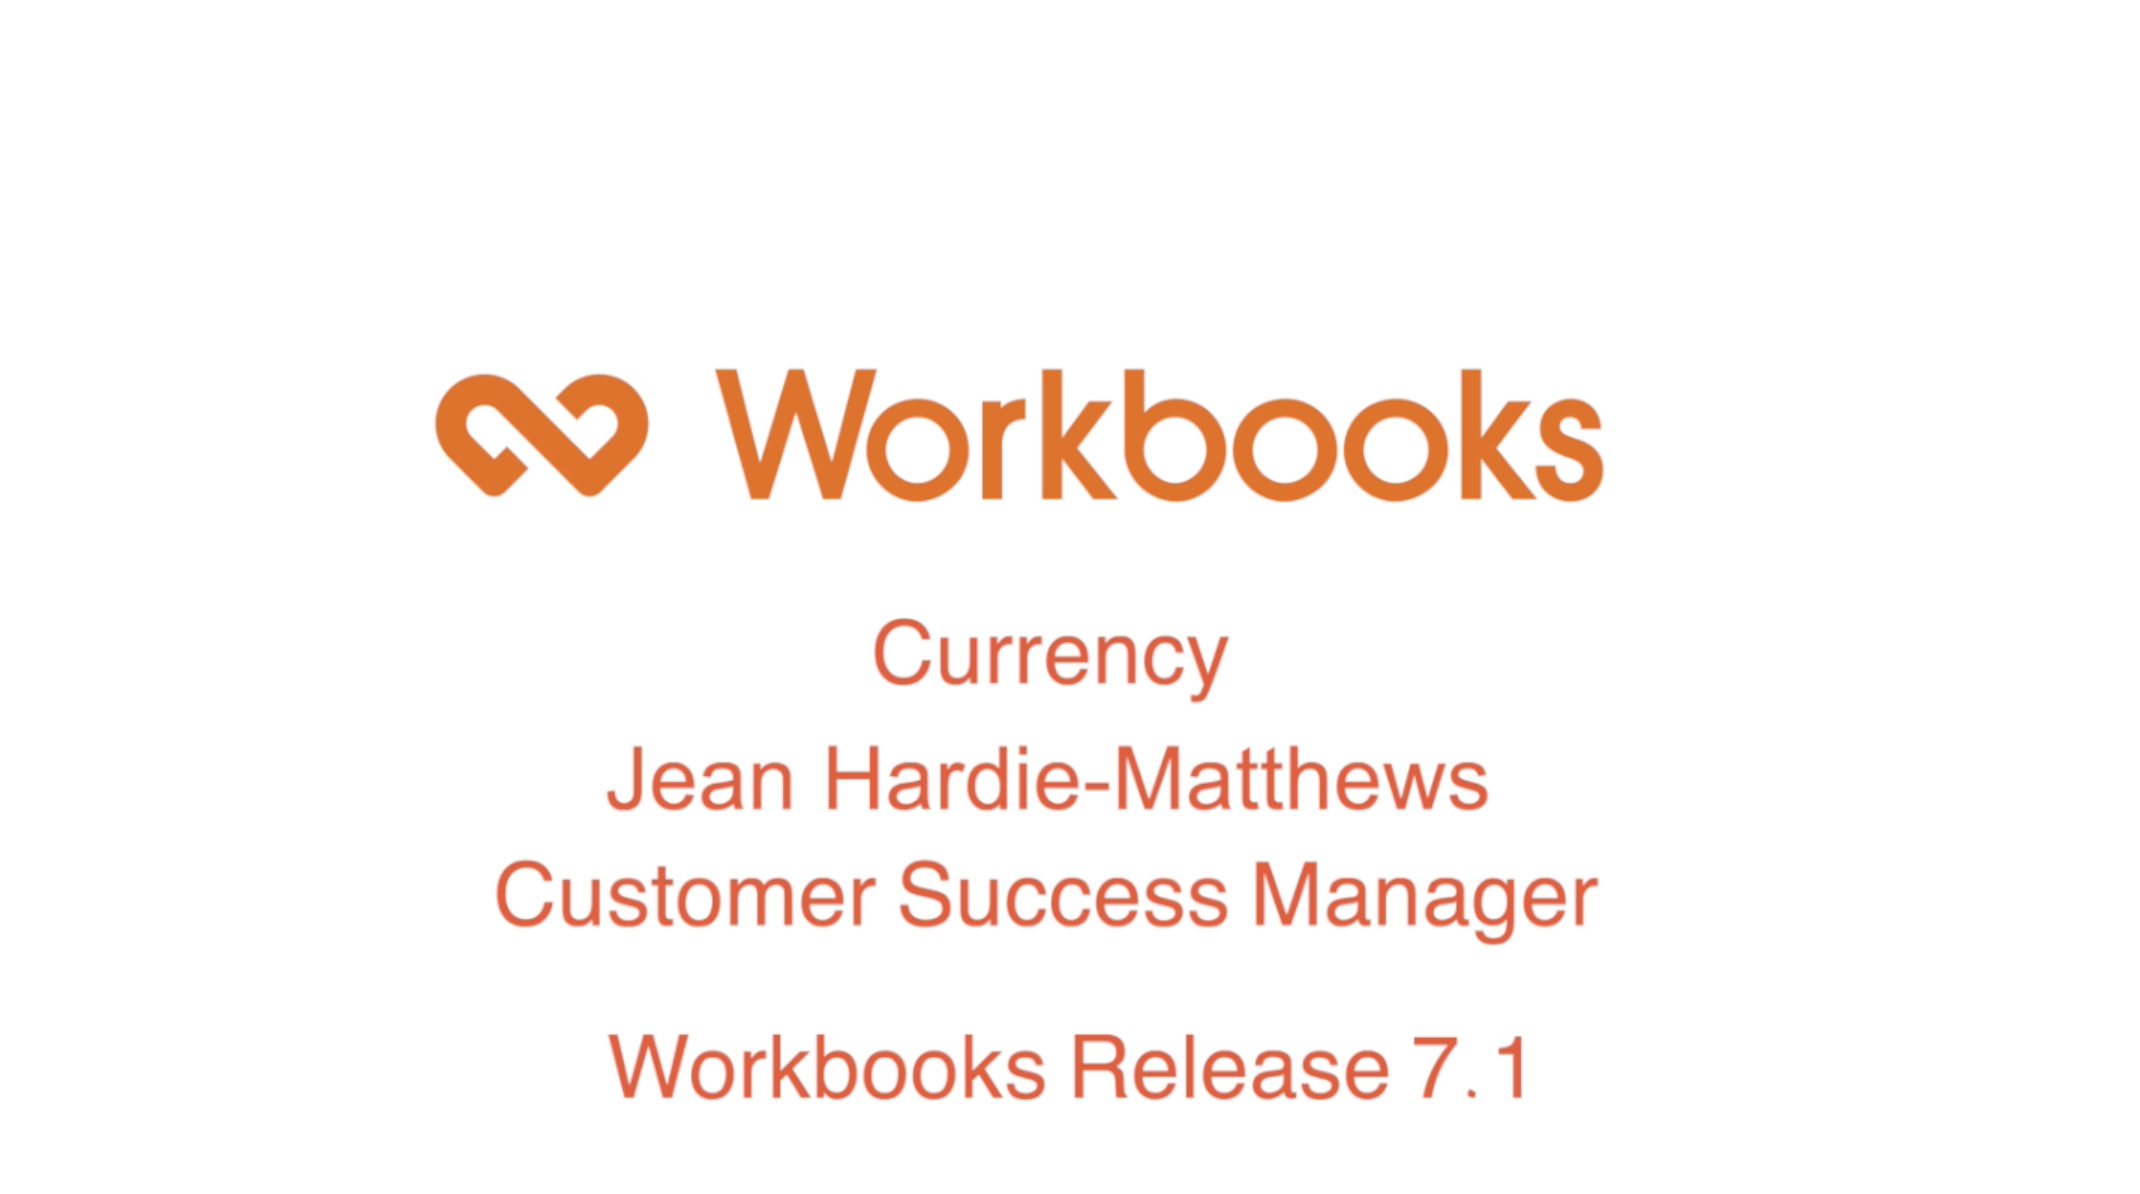 Workbooks Release 7.1 – Currency featured image